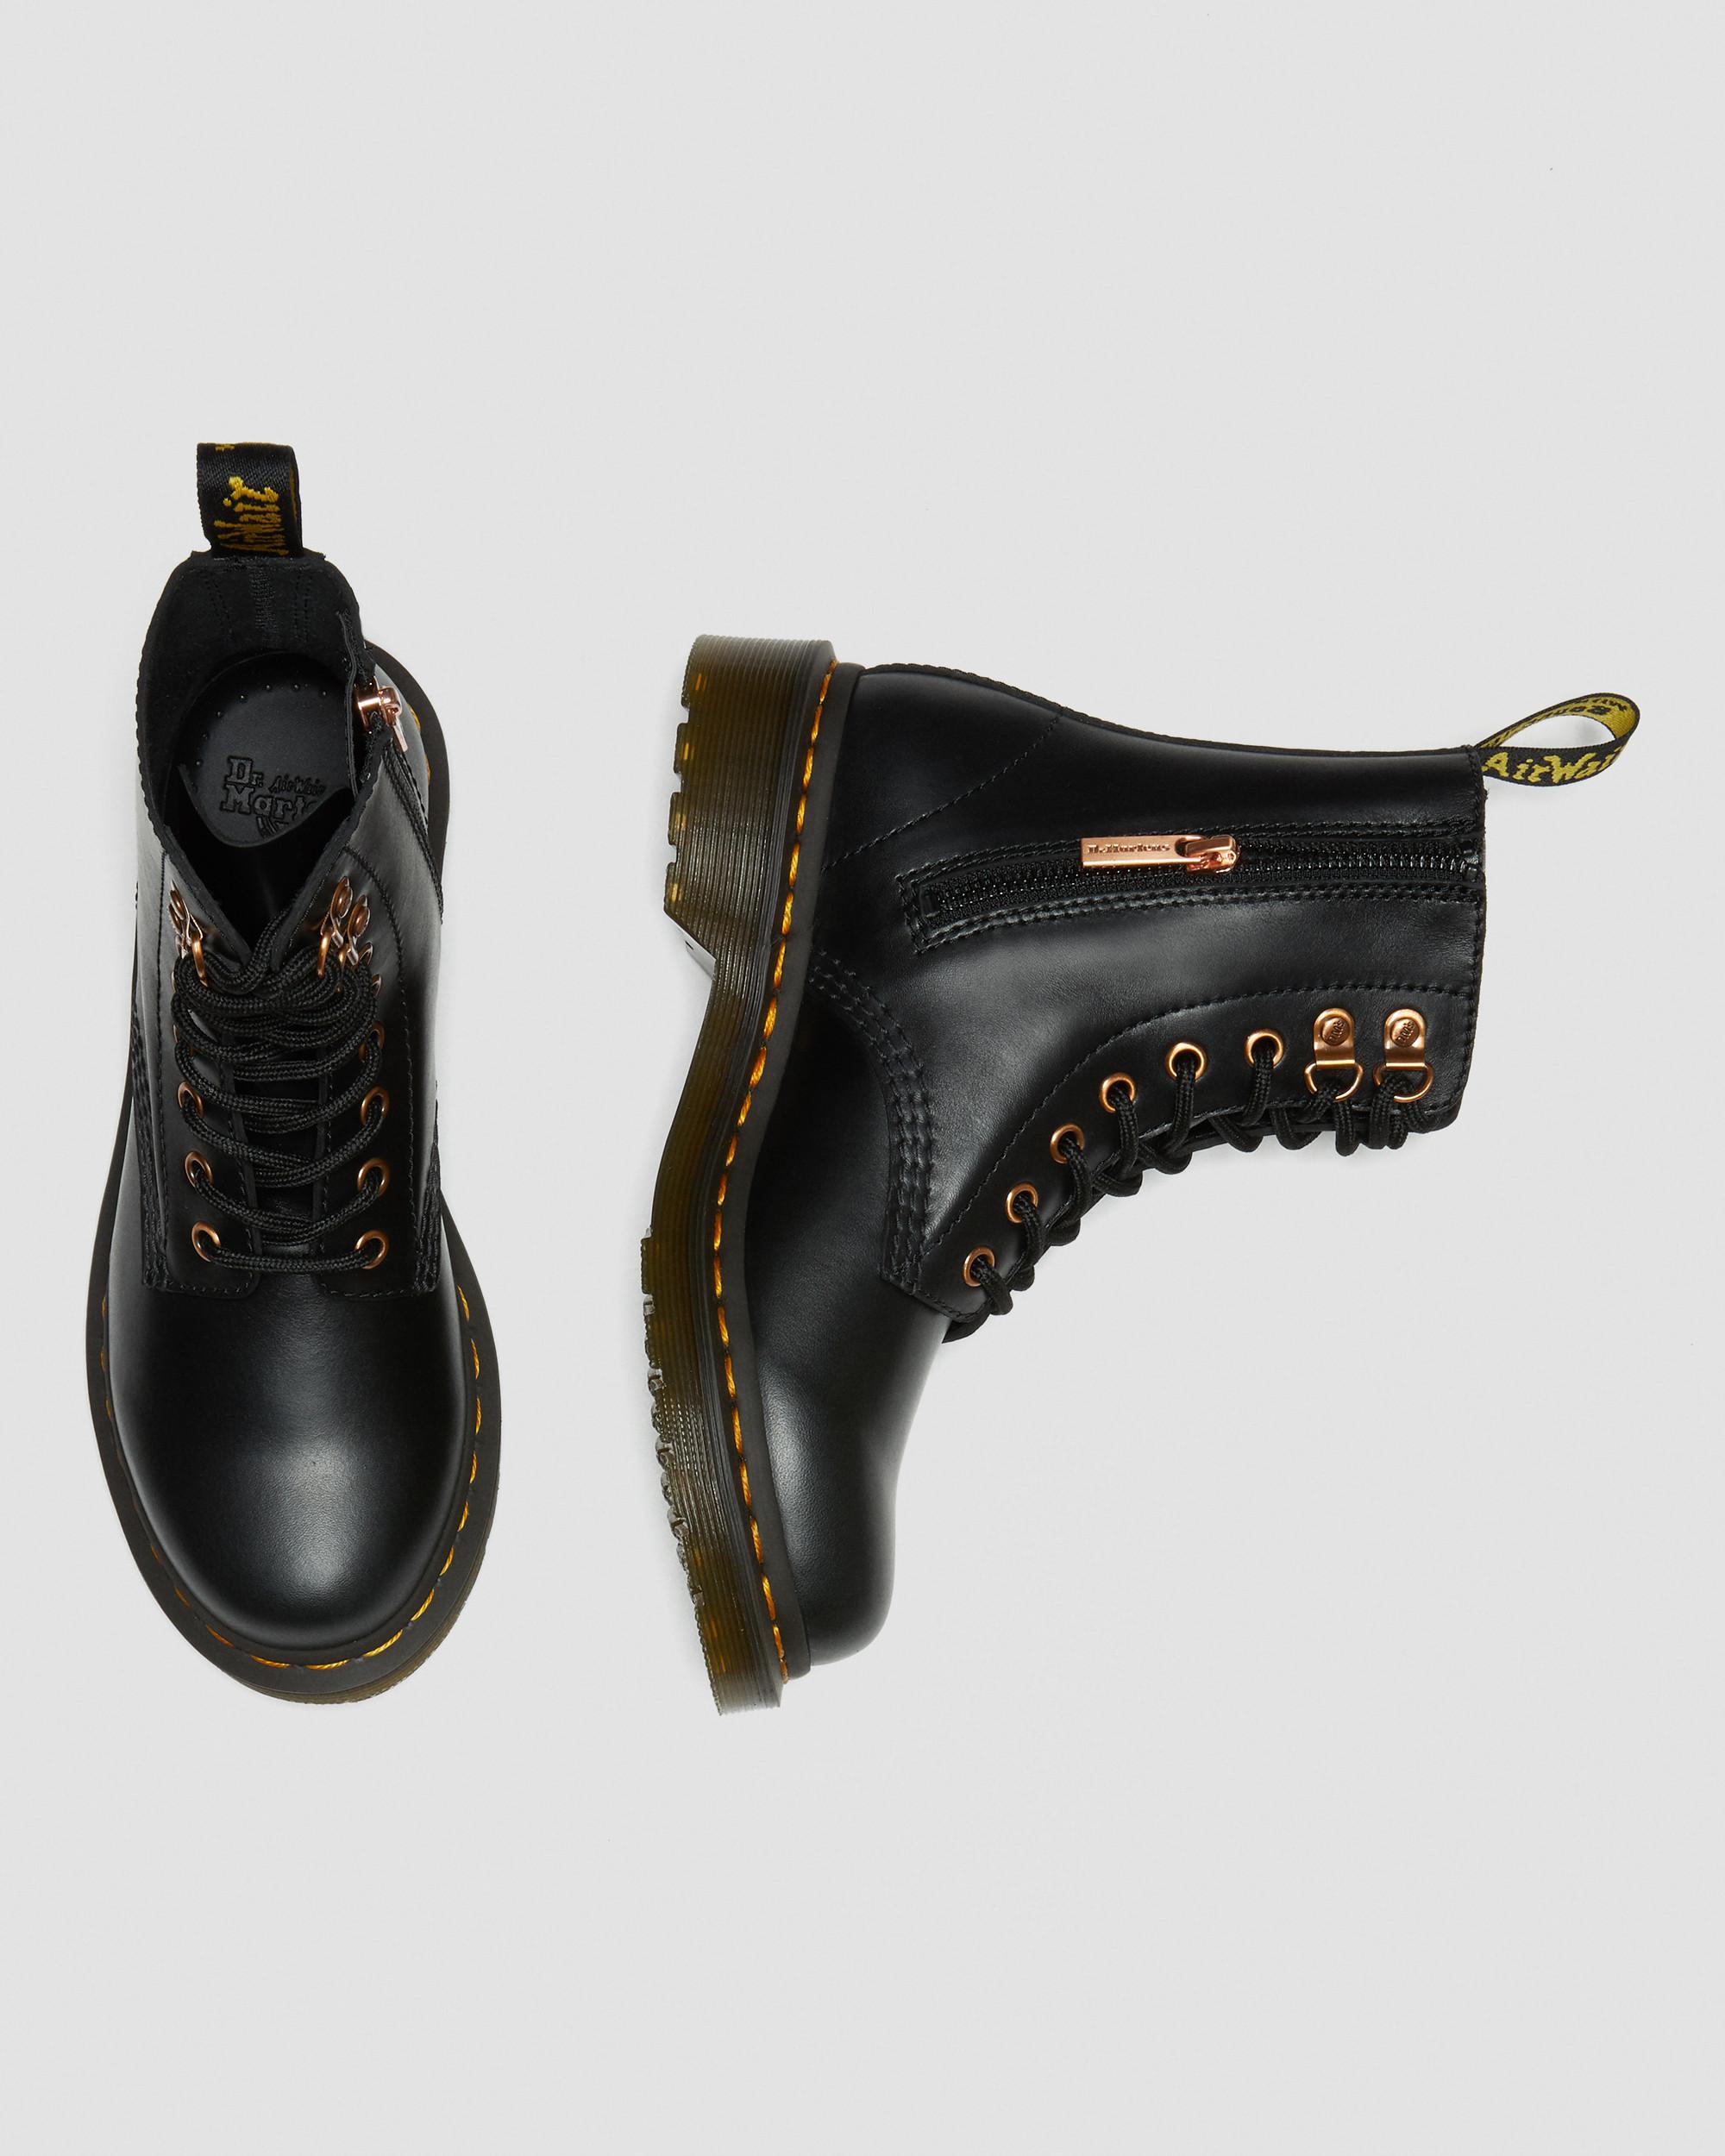 Beginner klem Whirlpool 1460 Pascal Rose Gold Hardware Leather Lace Up Boots | Dr. Martens